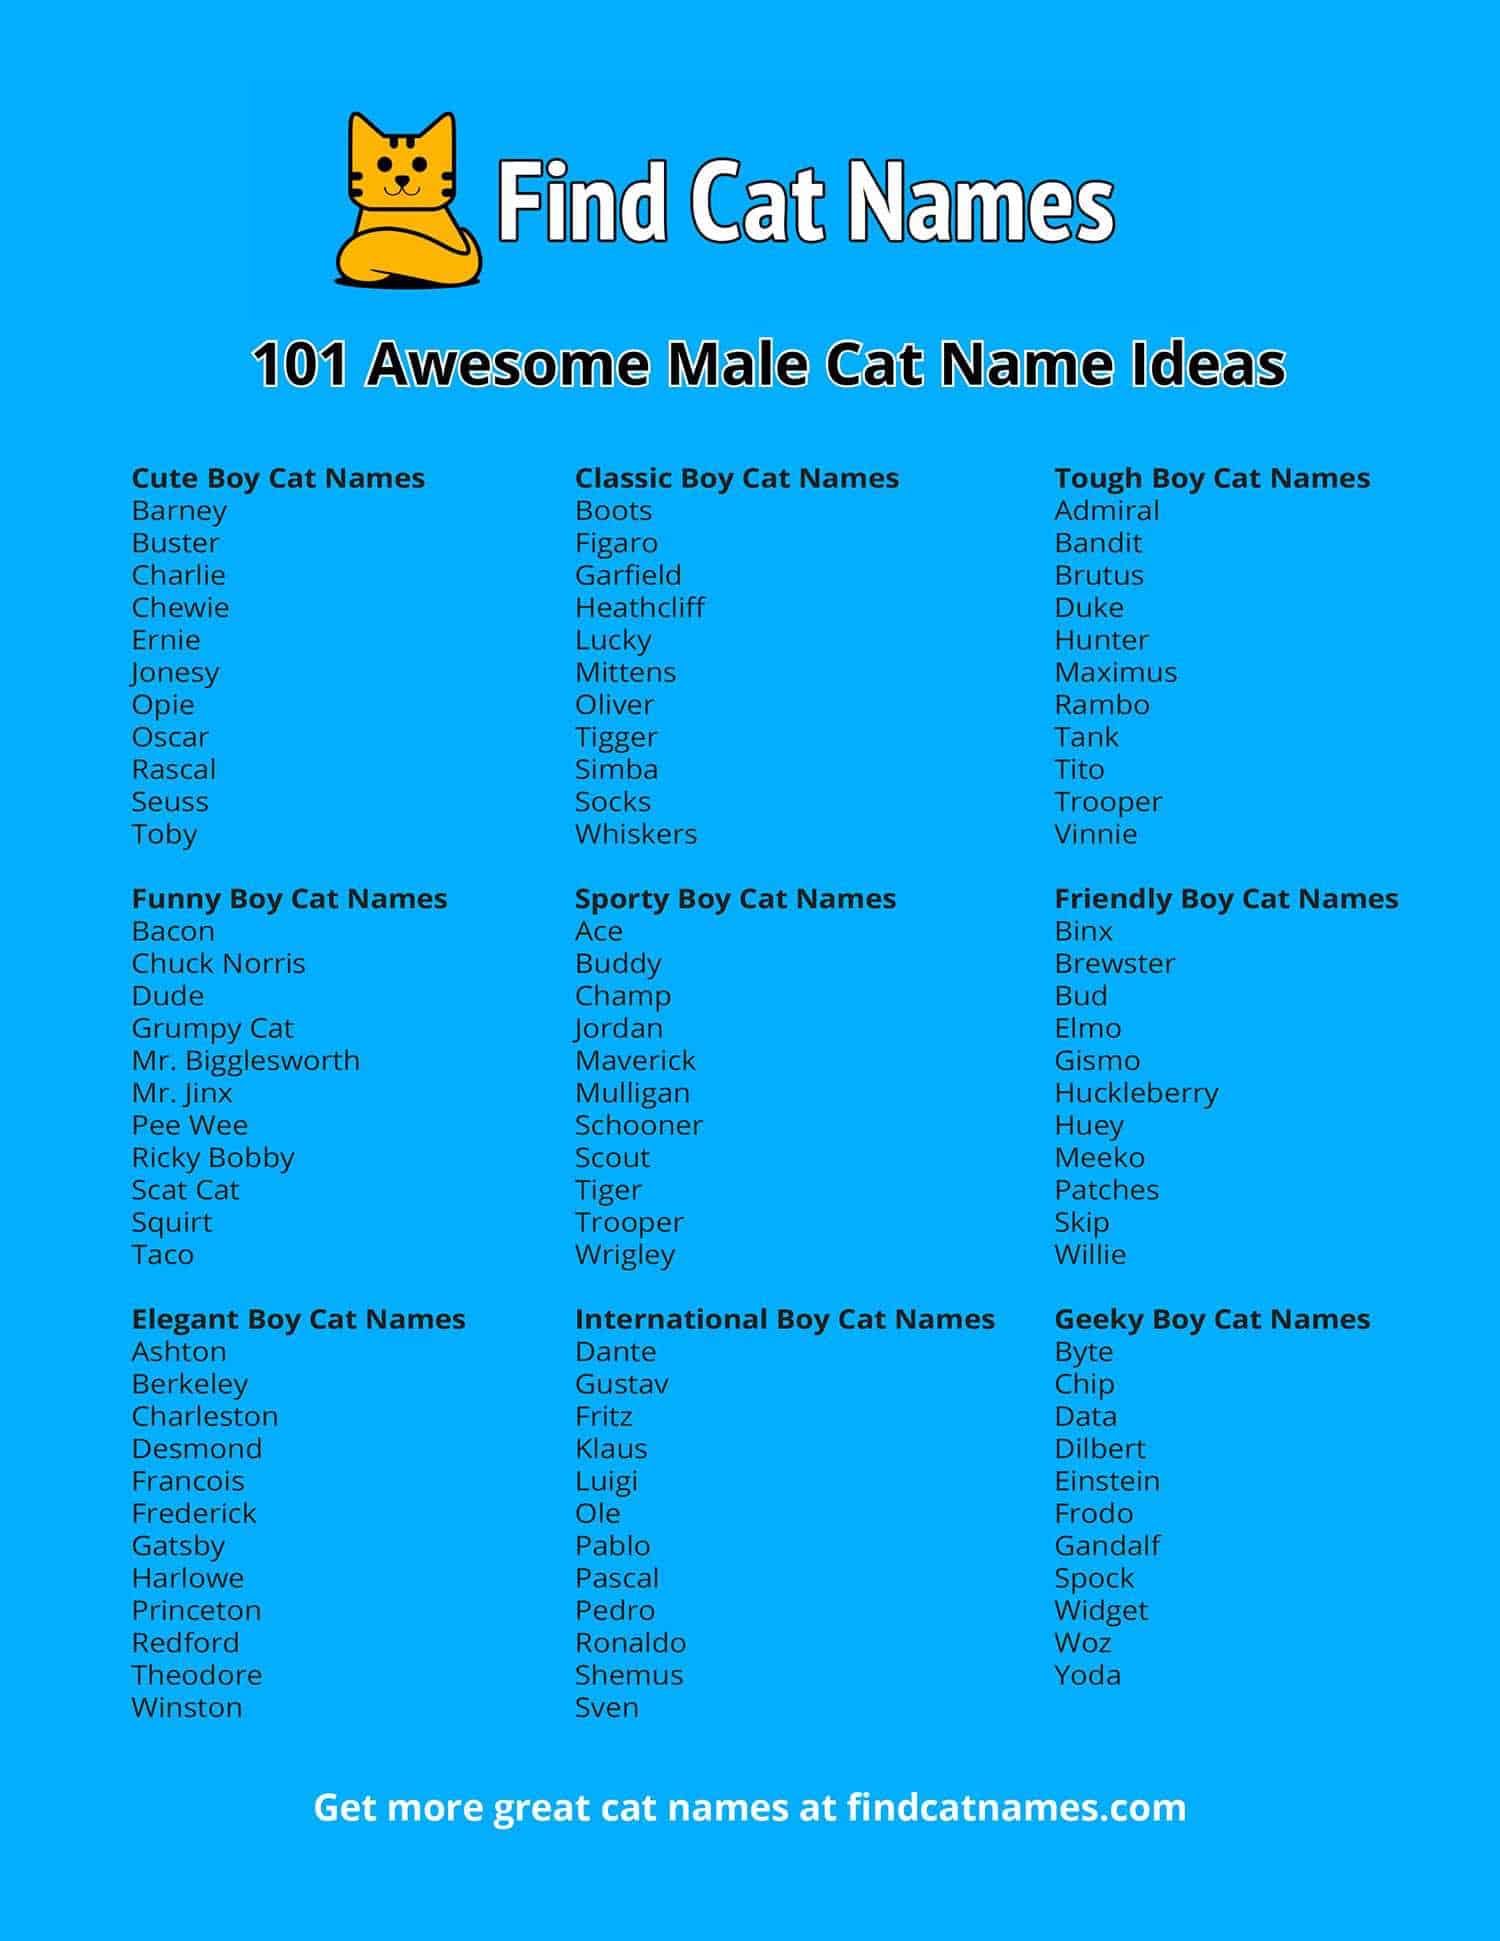 Male Cat Names Infographic